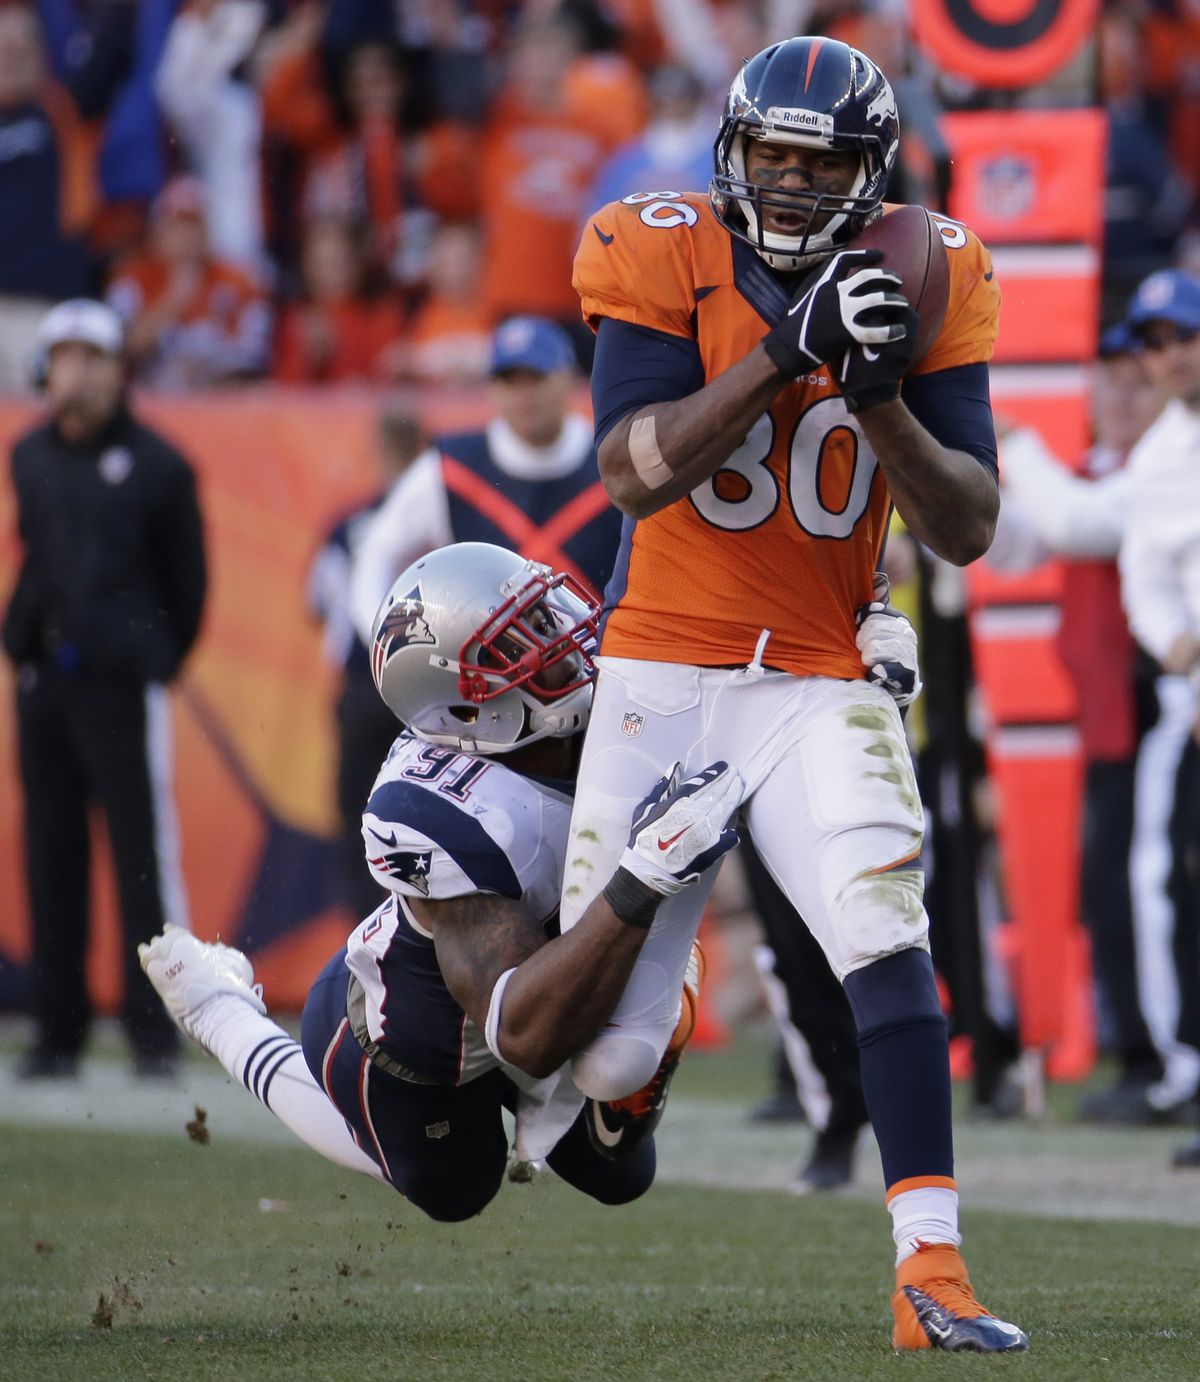 Patriots outside linebacker Jamie Collins tries to bring down Broncos tight end Julius Thomas as he heads downfield with the ball. (Associated Press)